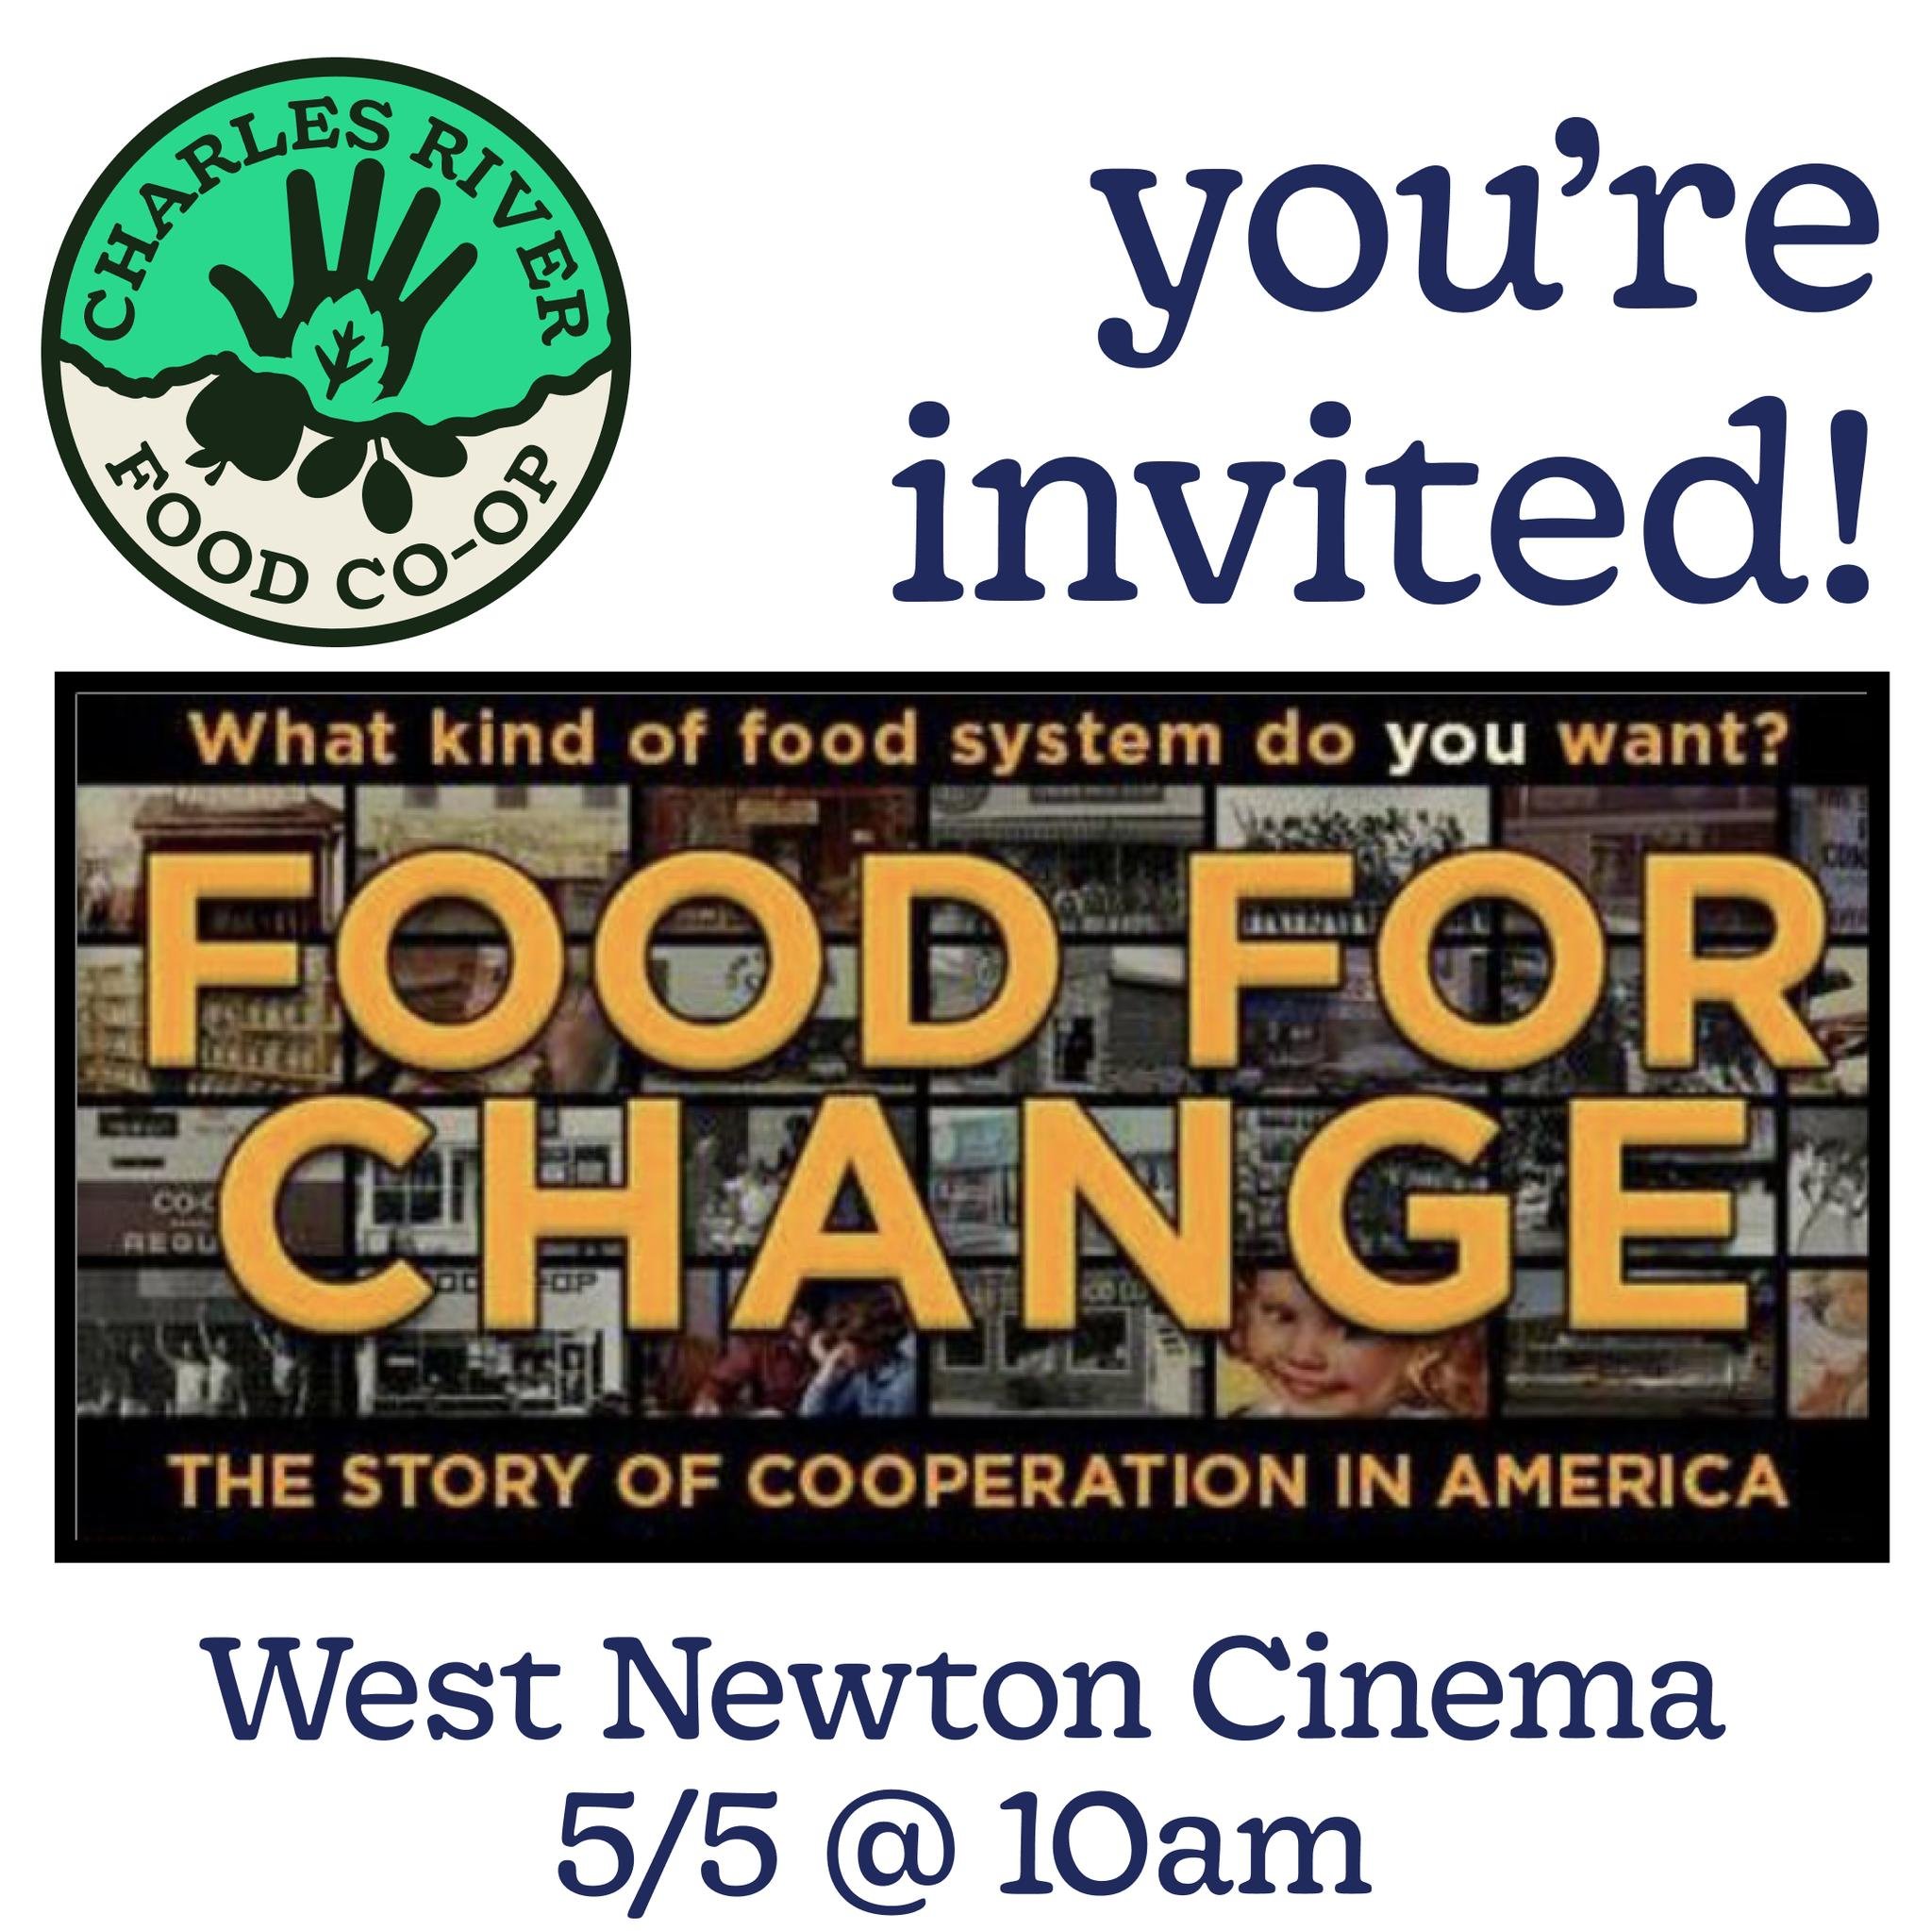 Join us this Sunday 10am at West Newton Cinema to learn about the co-op movement the Charles River Food Coop is part of! Get your tickets at the link in our bio. 
#foodcoop #charlesriverfoodcoop #foodforchange #westnewtoncinema